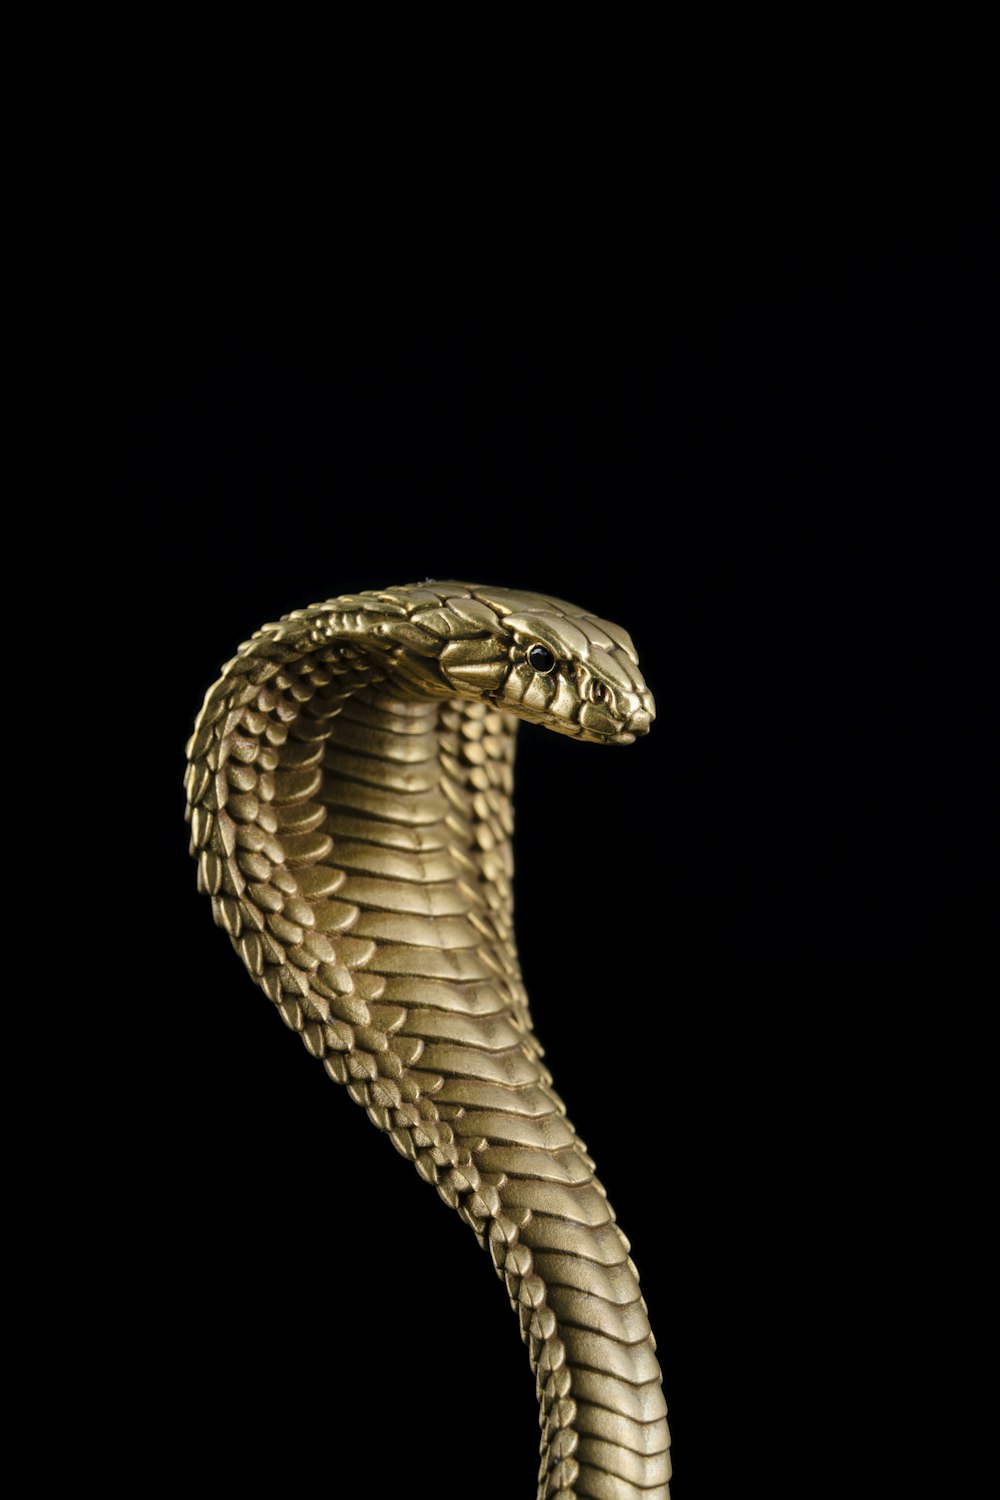 a snake with a black background